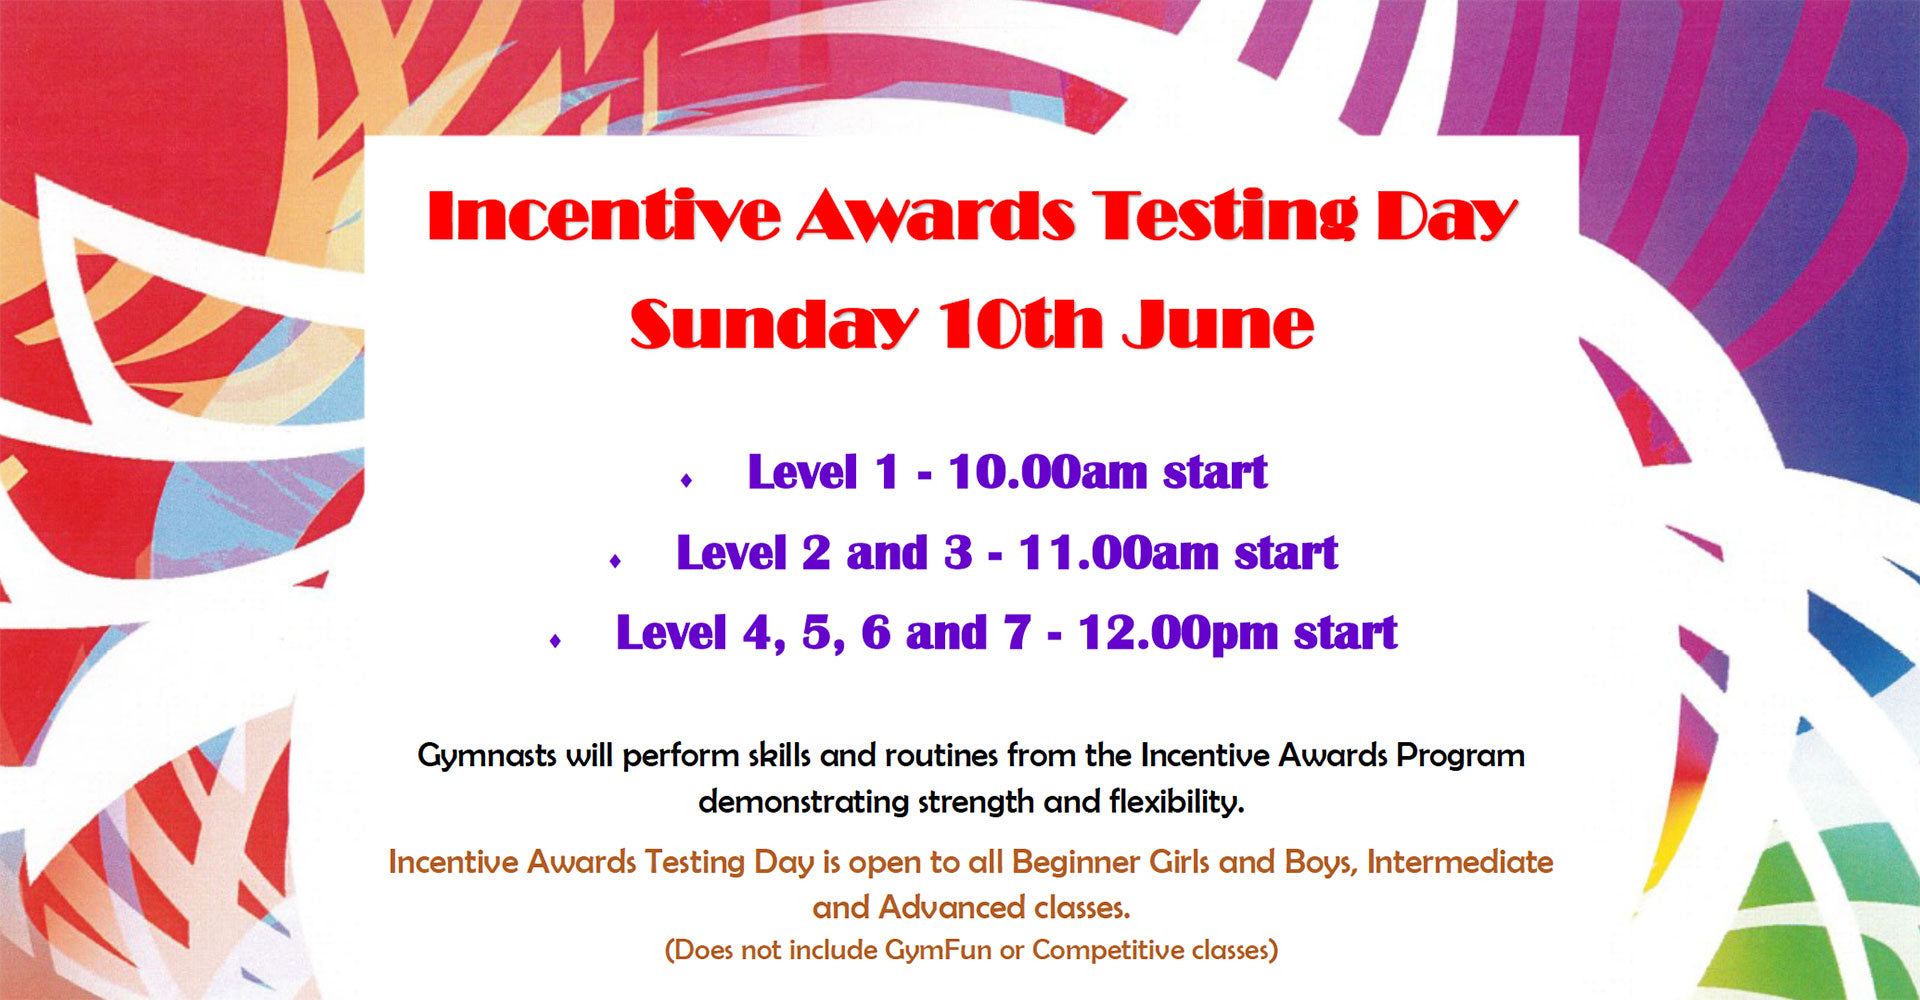 Incentive Awards - Sunday 10th June 2018